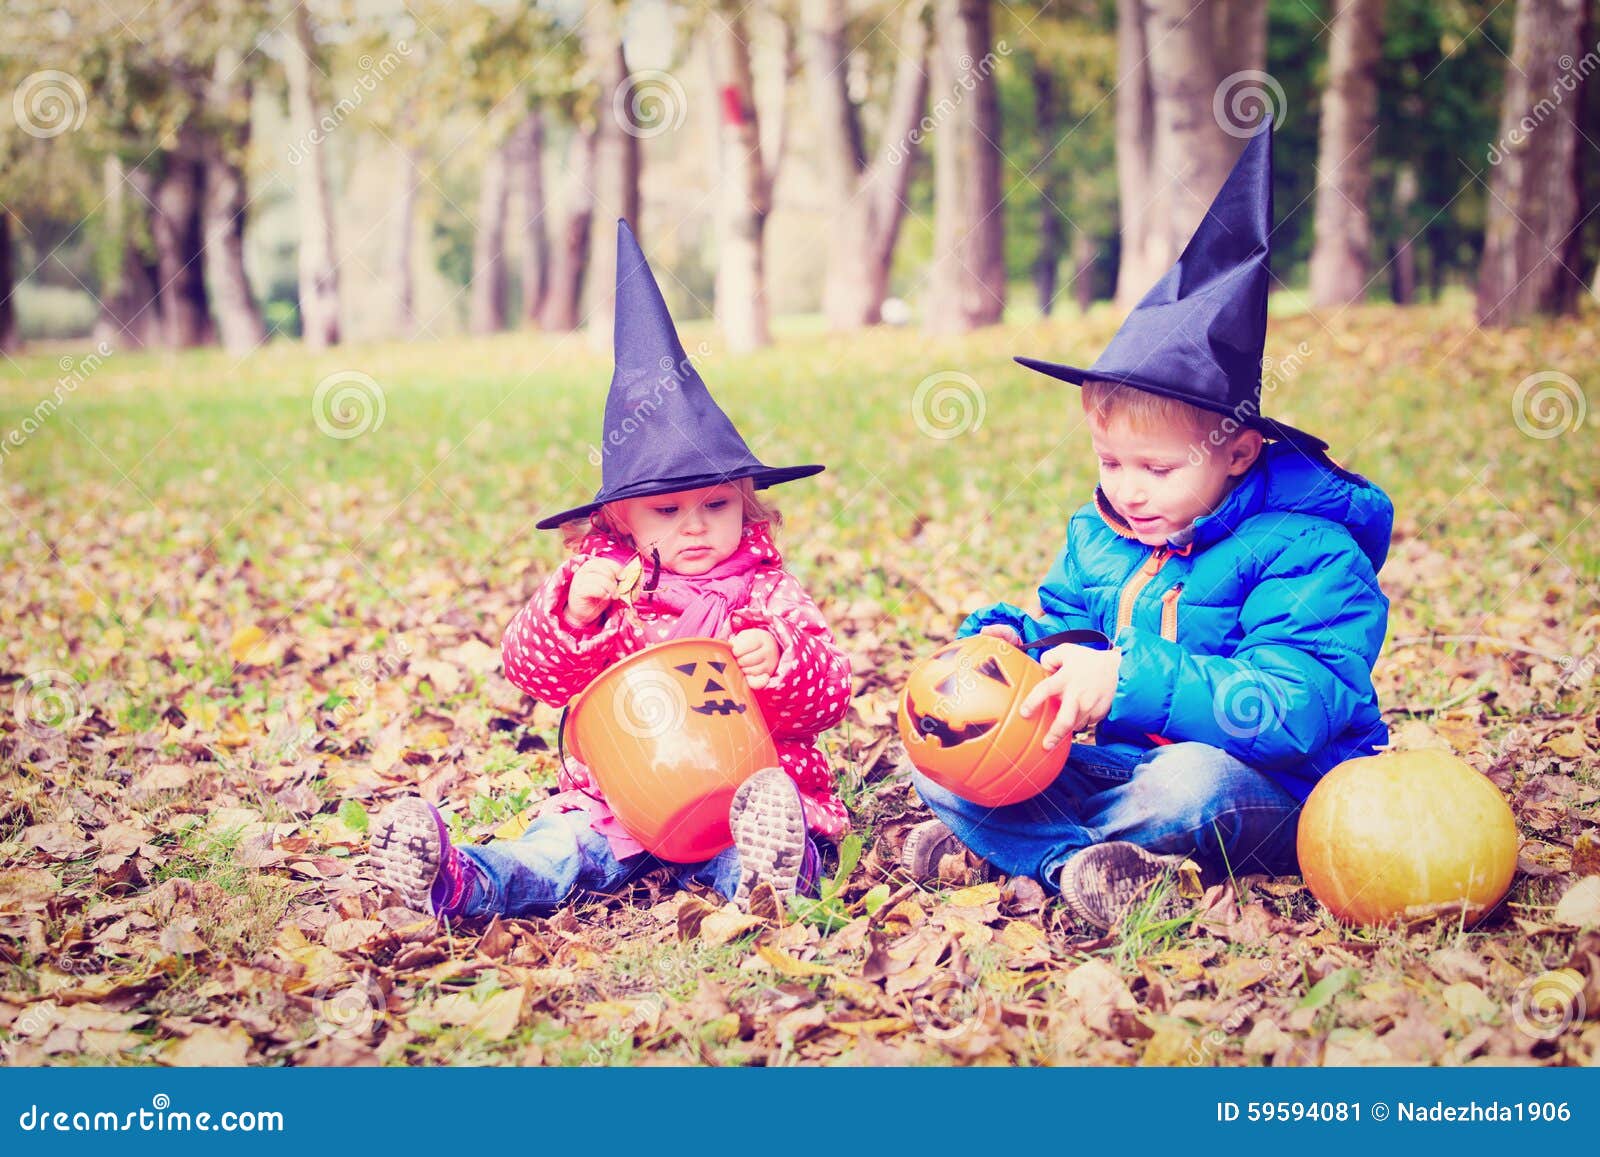 Kids in Halloween Costume Play at Autumn Park Stock Image - Image of ...